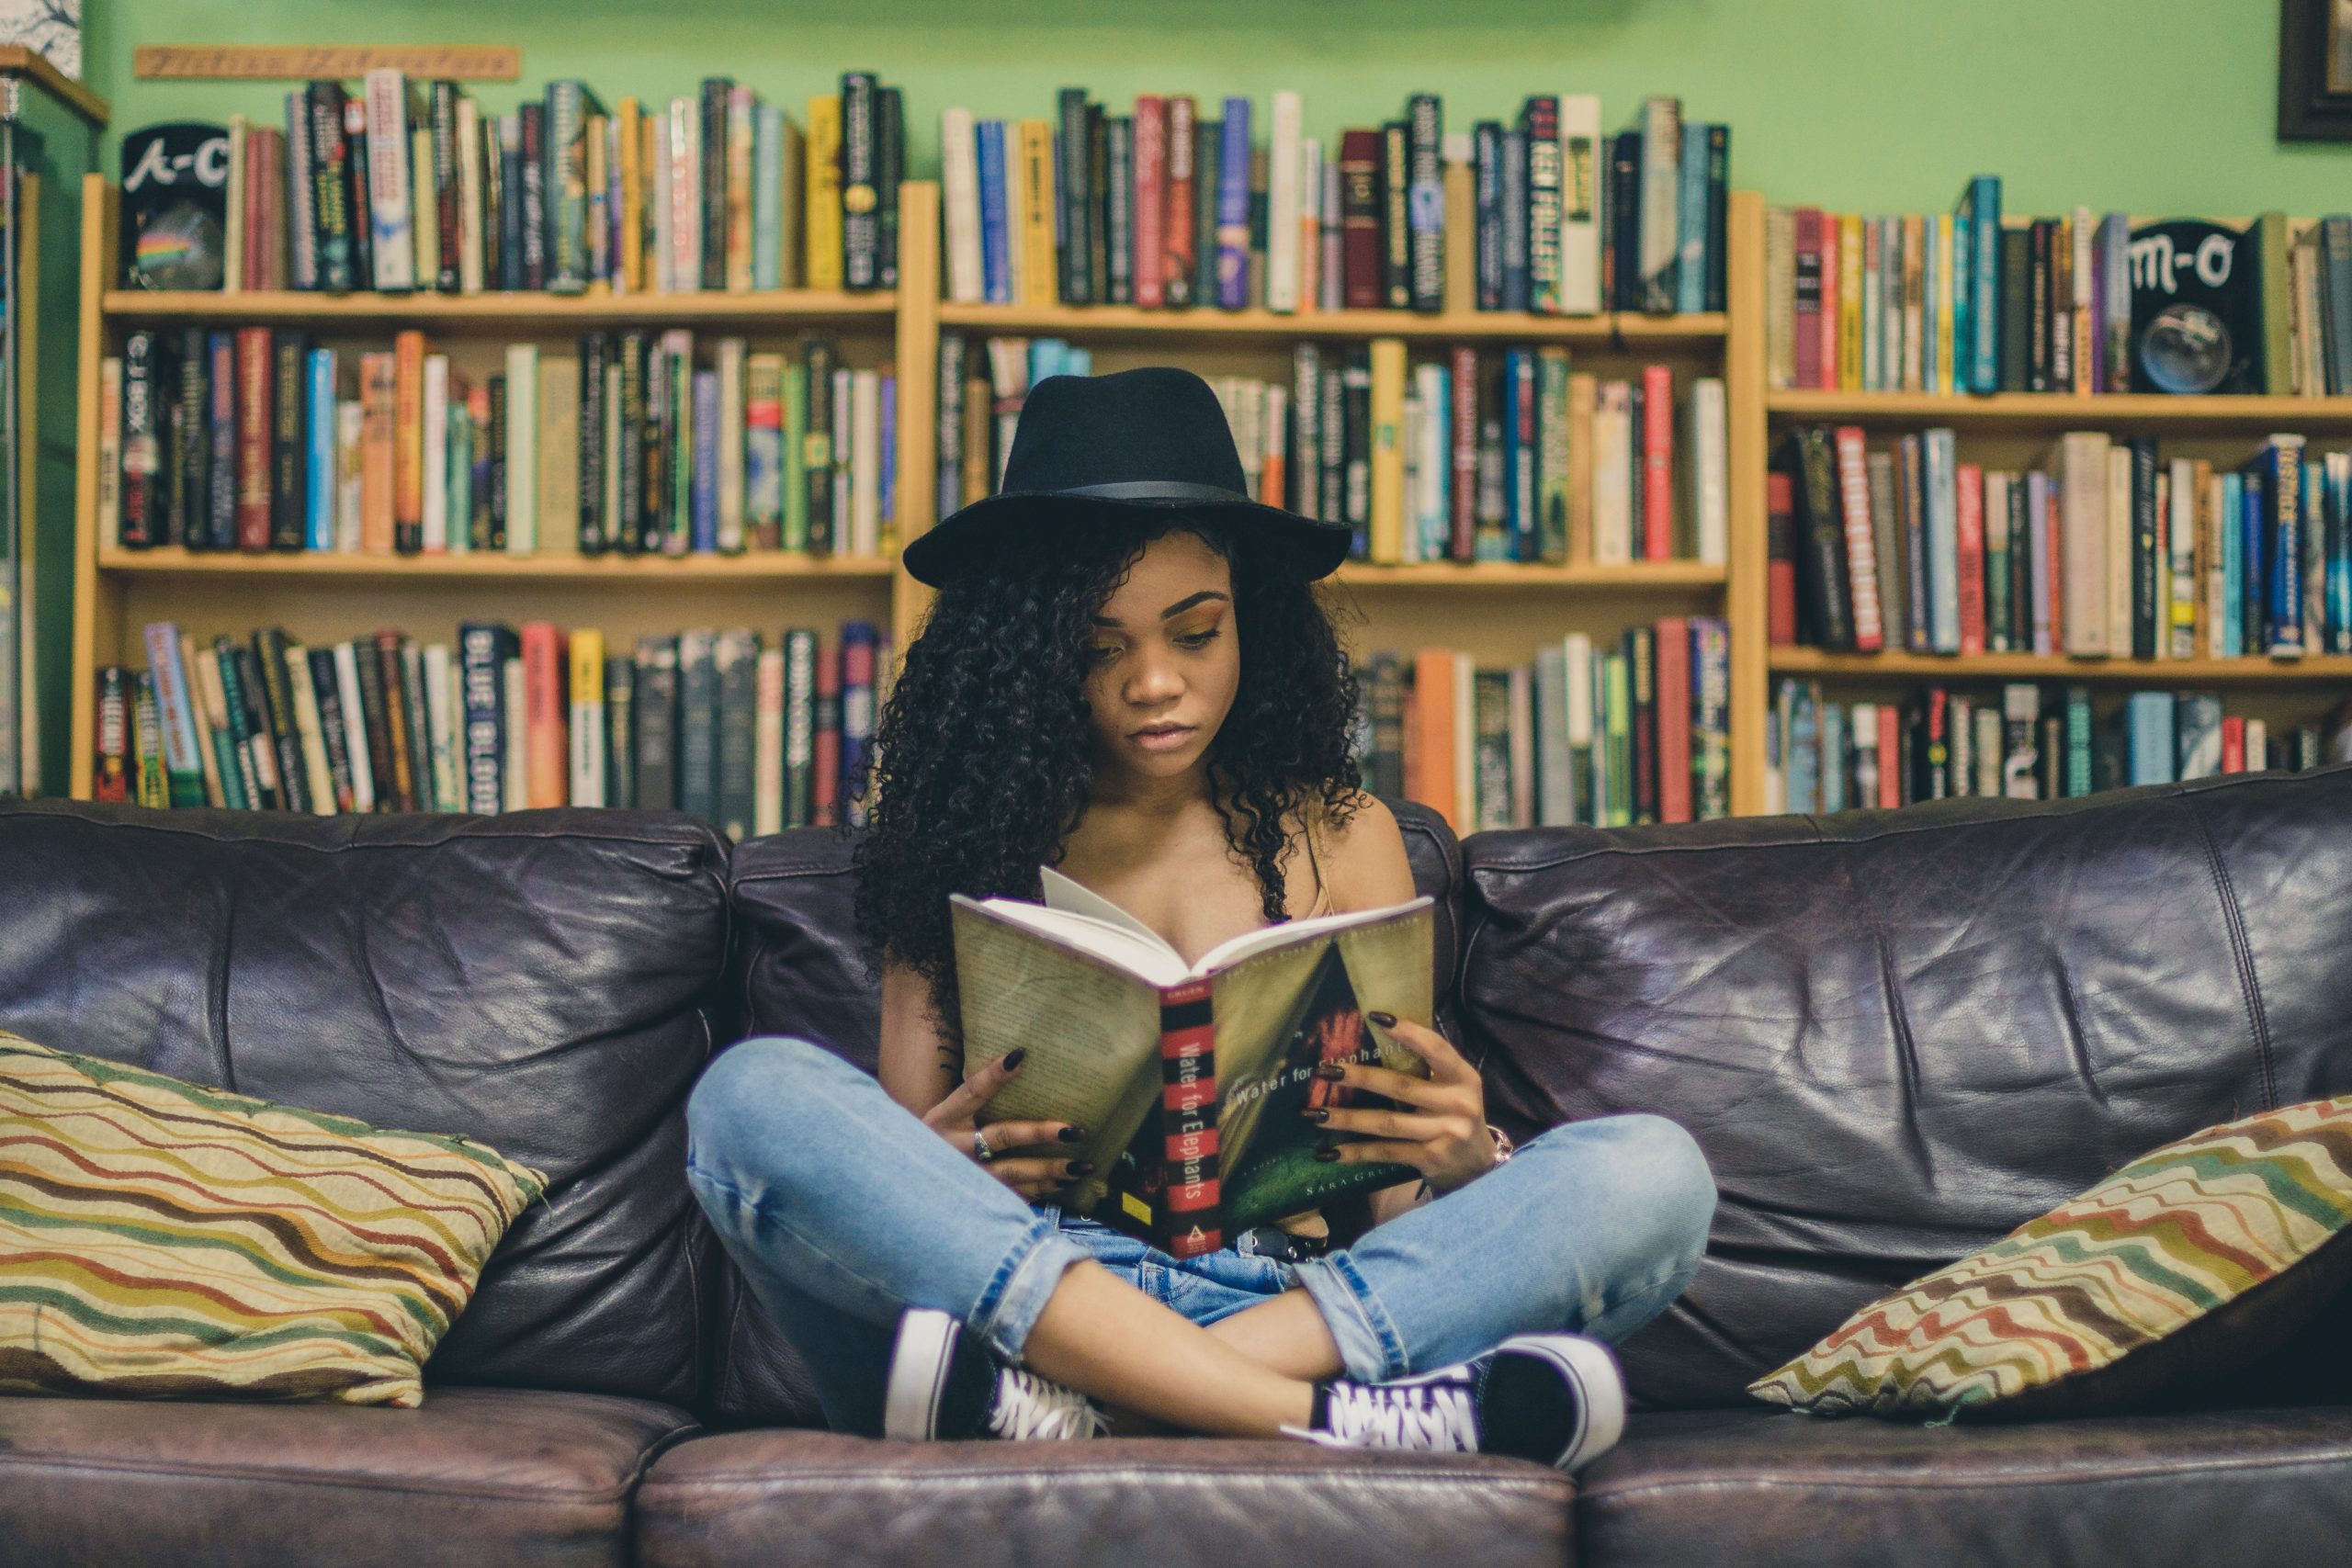 Woman reading while sitting on a couch, with bookshelves filling the background.